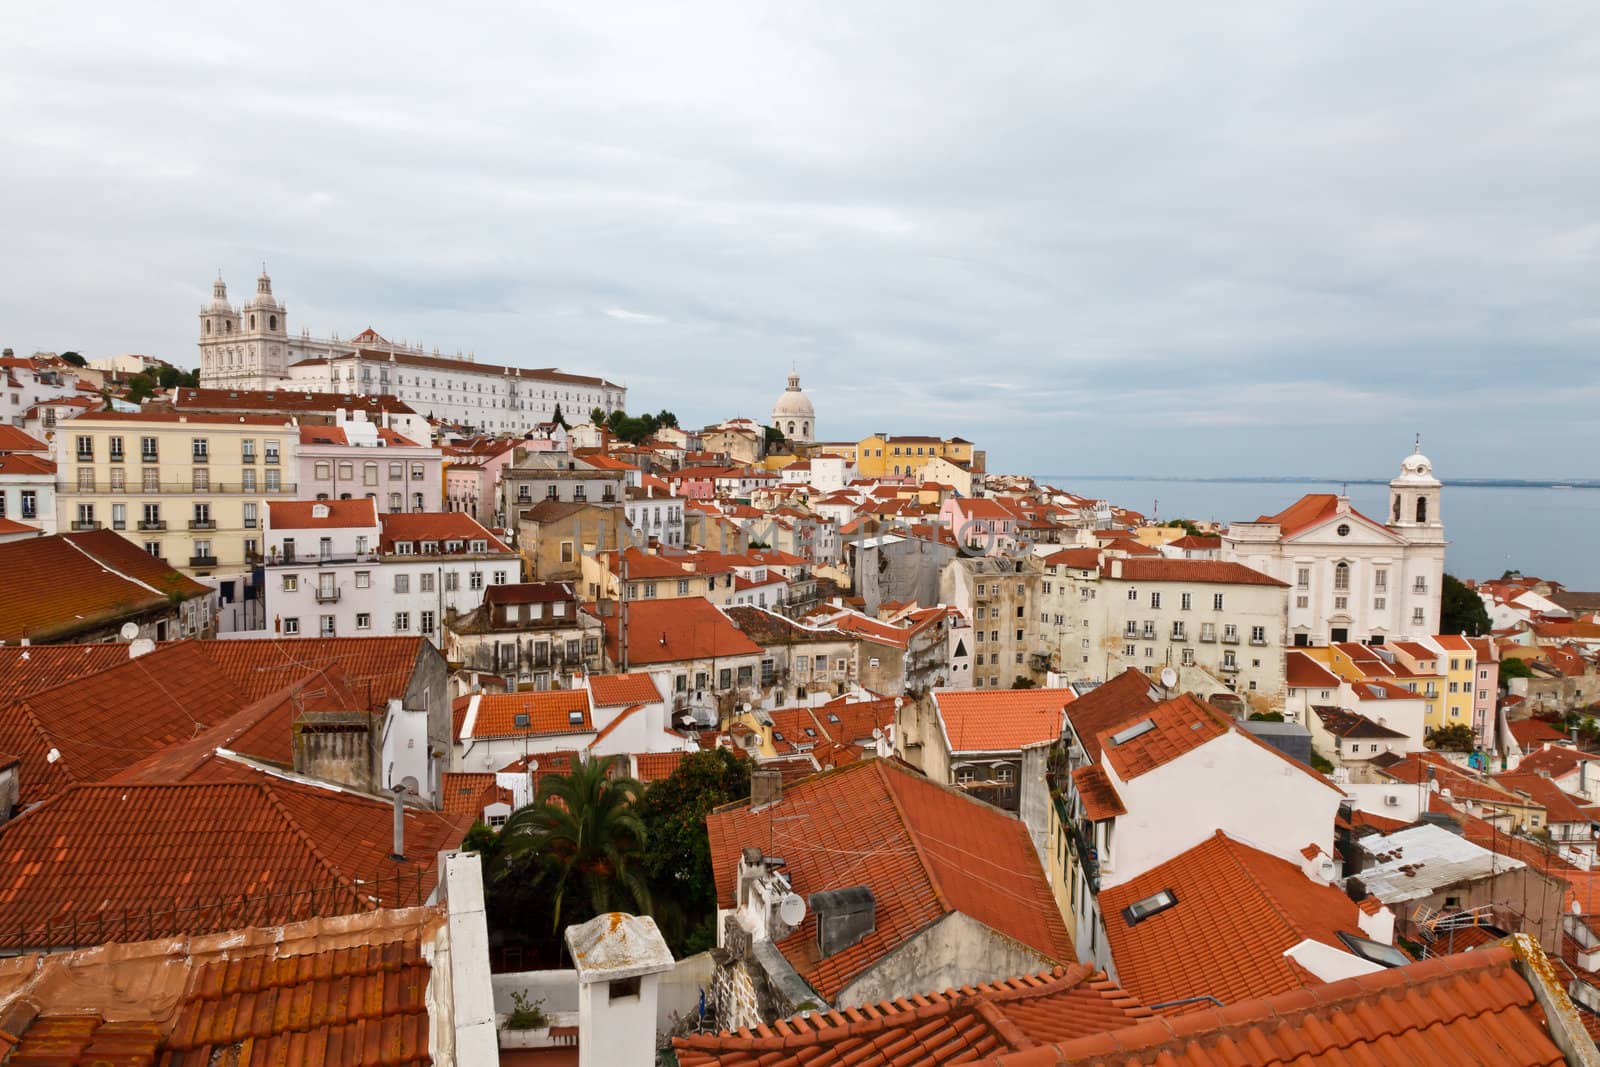 Panorama of Recently Restored Alfama Quarter in Lisbon, Portugal